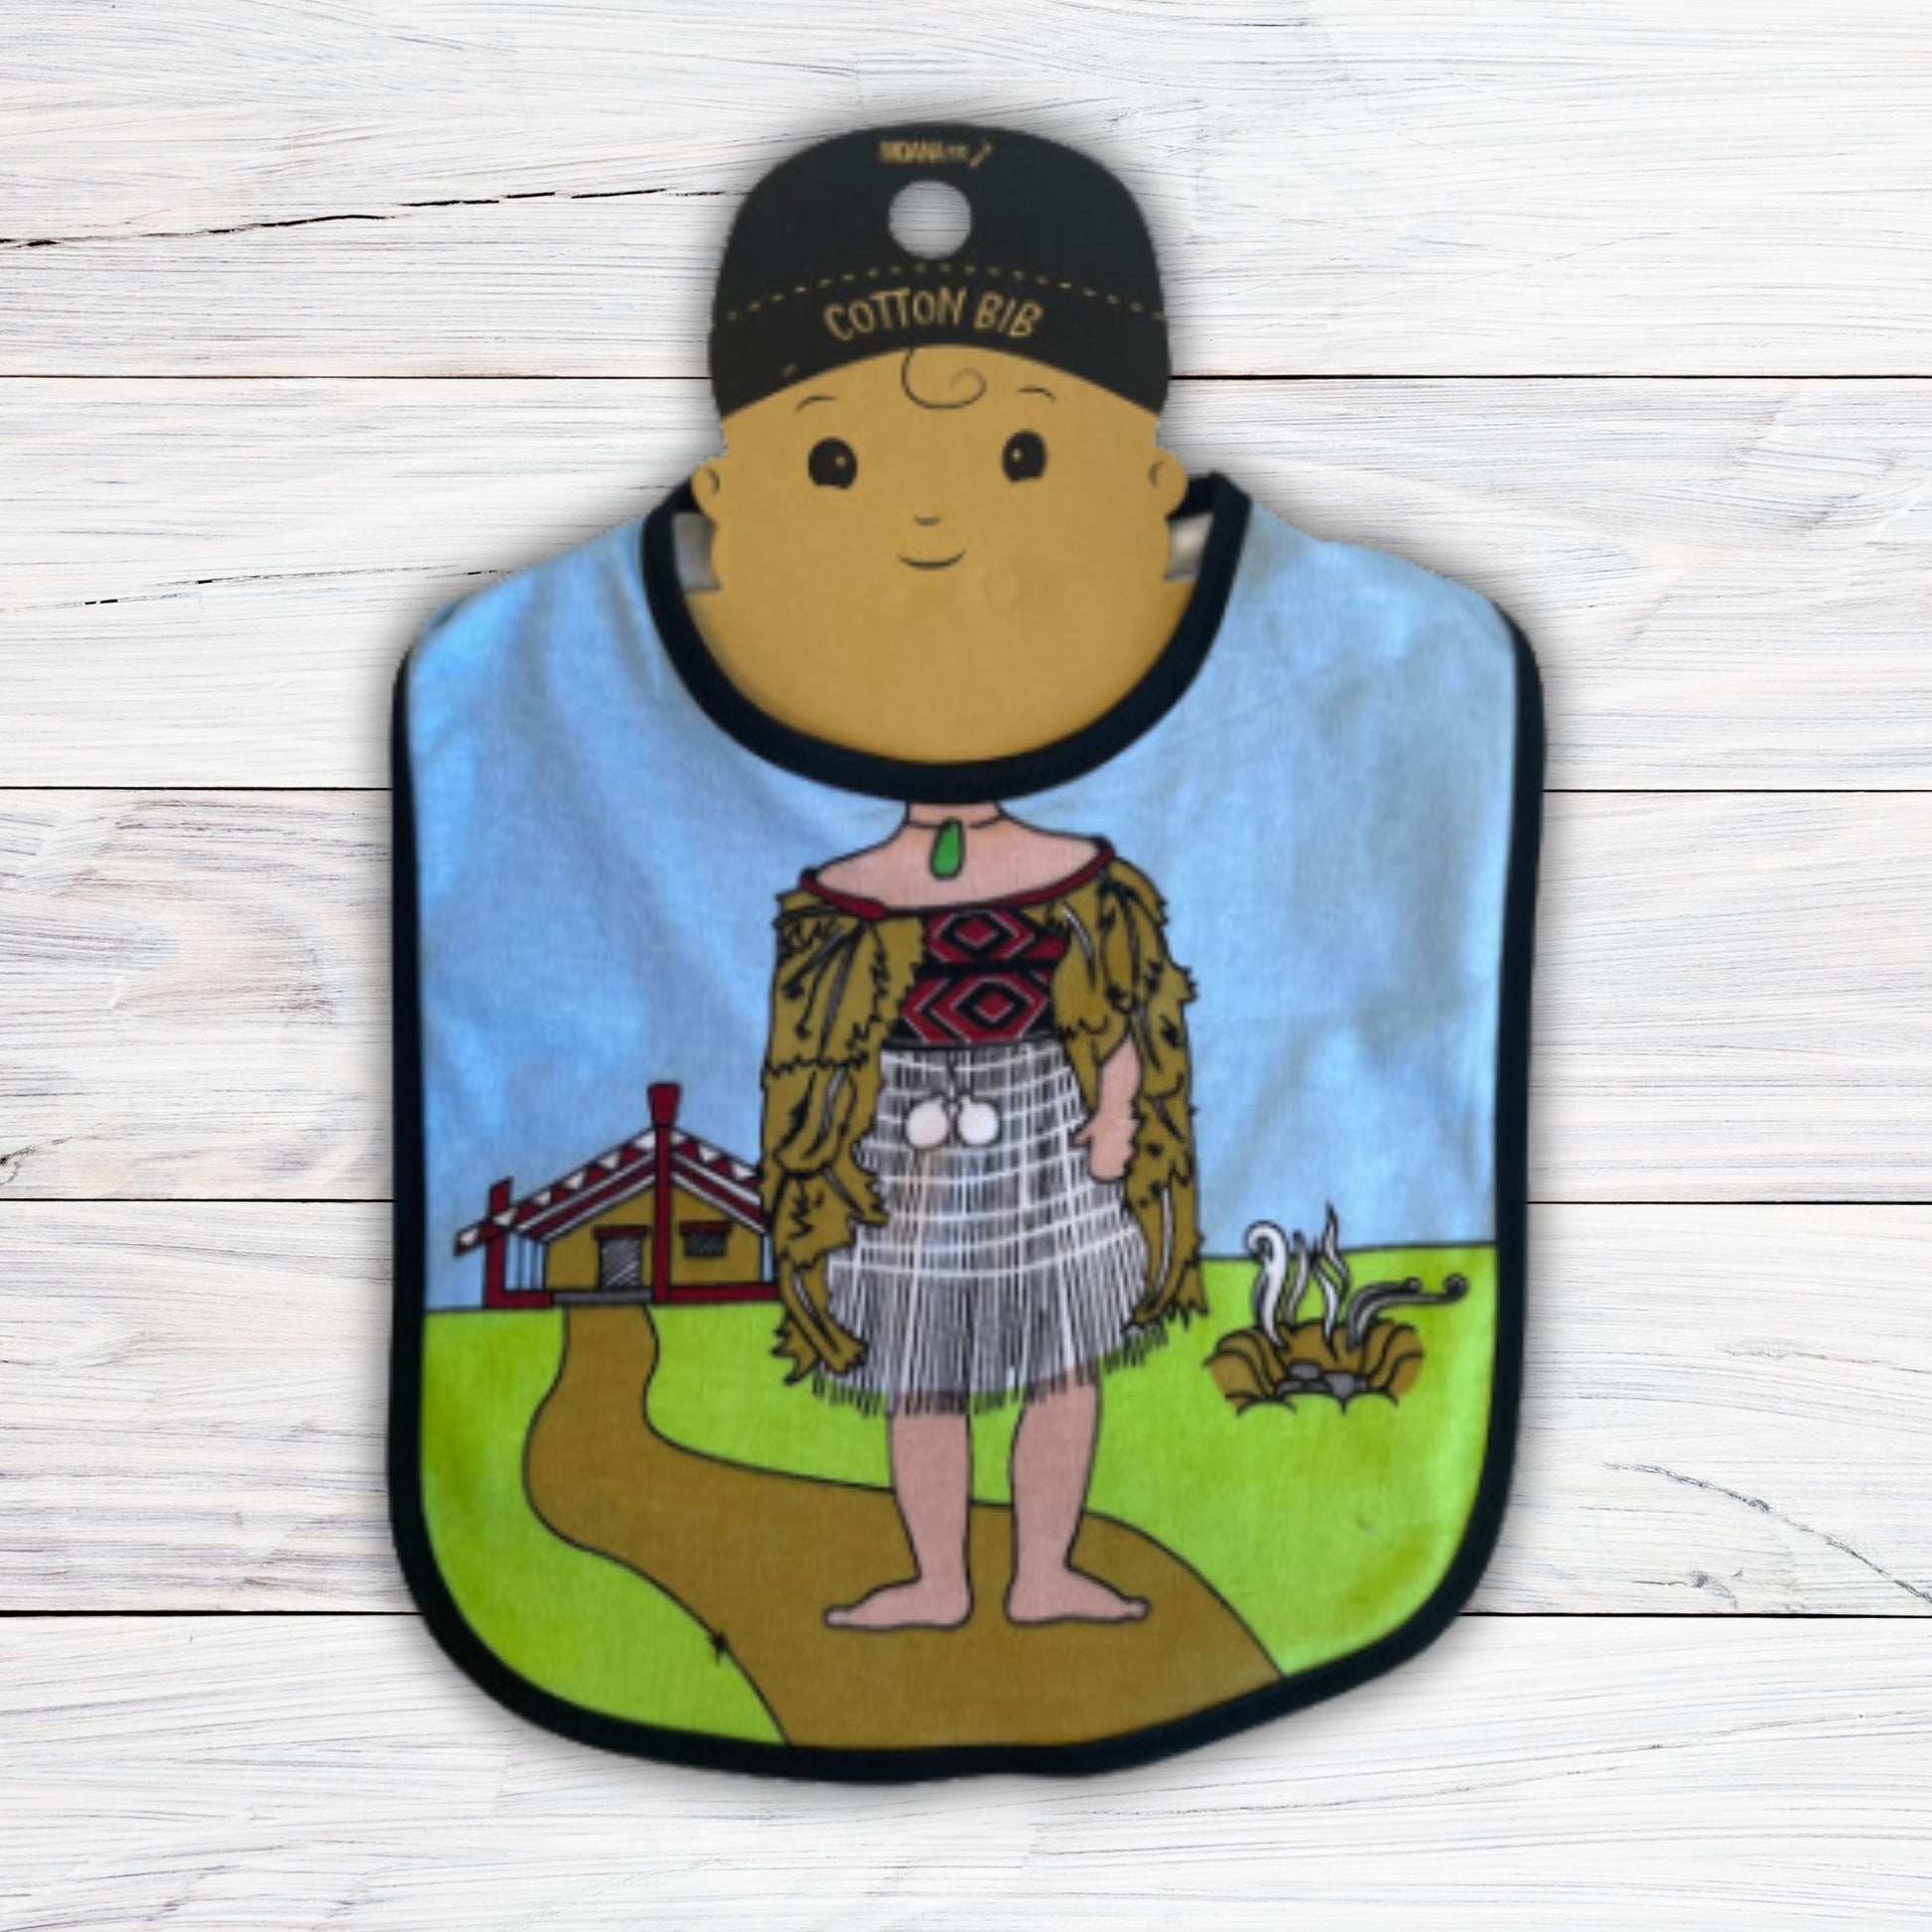 Baby bib with a maori wahine body and marae in the background.